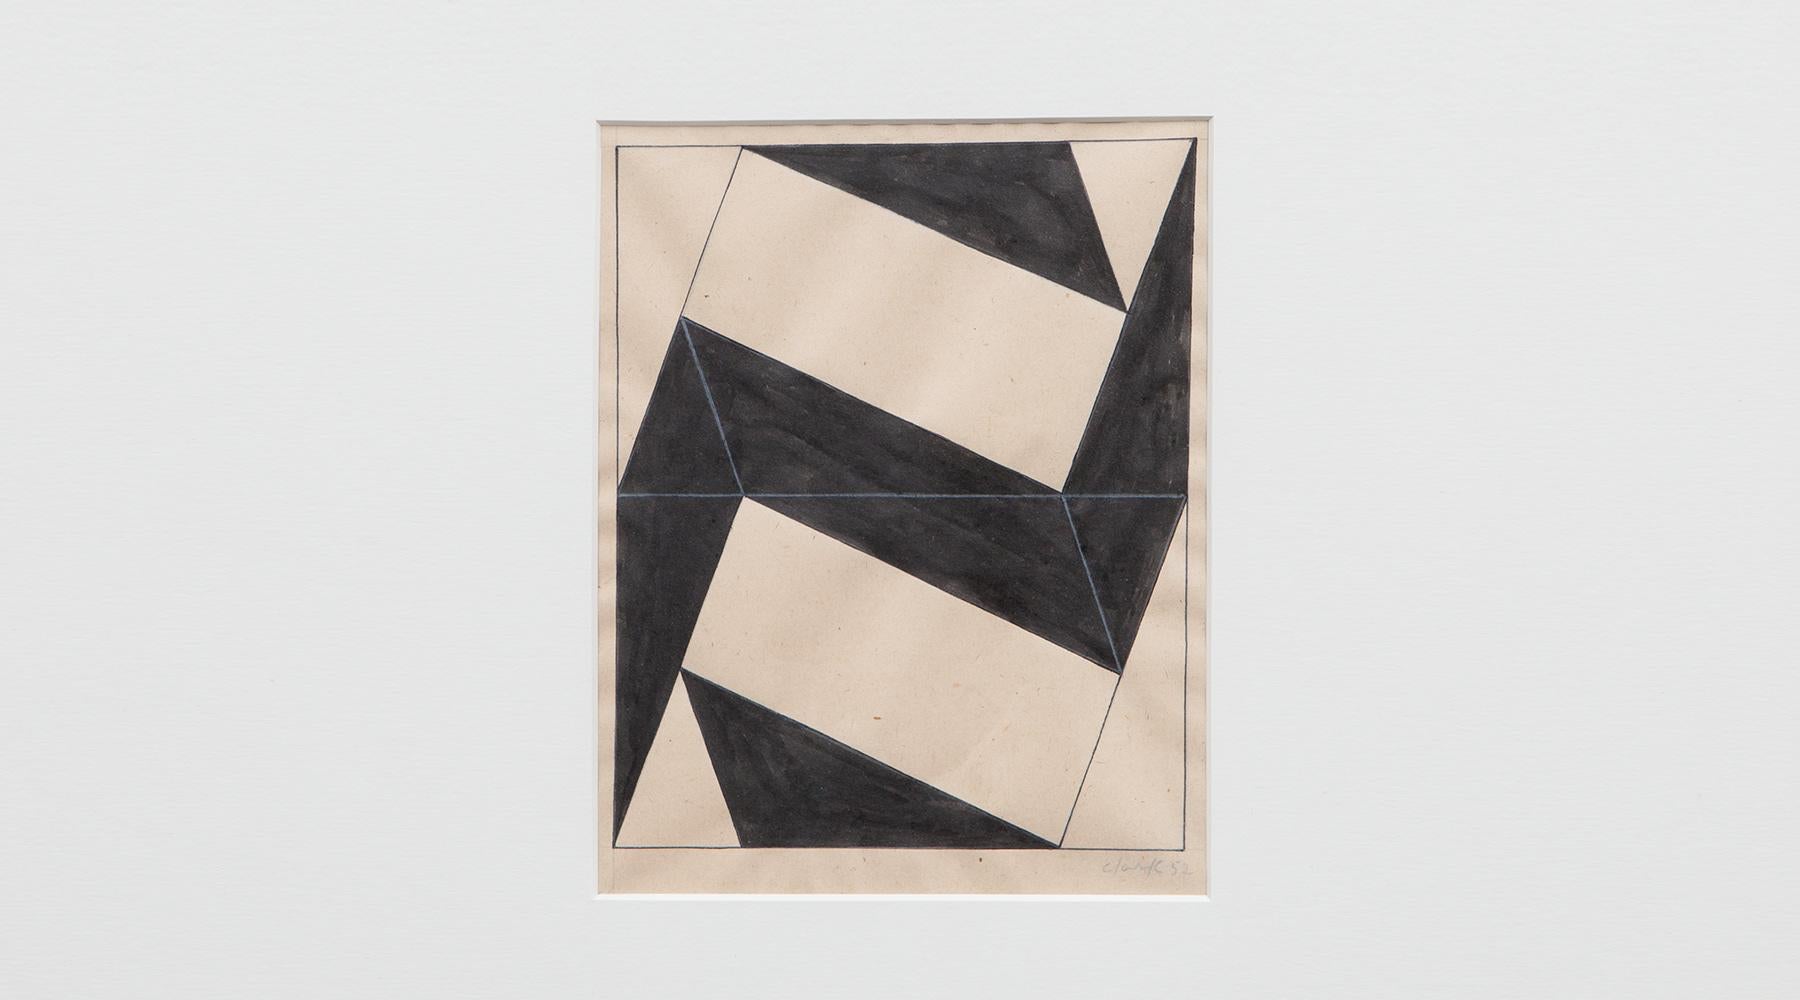 Pencil and ink on paper in black and warm white by Lygia Clark, signed, 1952, Brazil.

The drawing by Lygia Clark comes in a wooden frame. The originality is marked by the signature, as well as the year of origin. The drawing itself has the size of